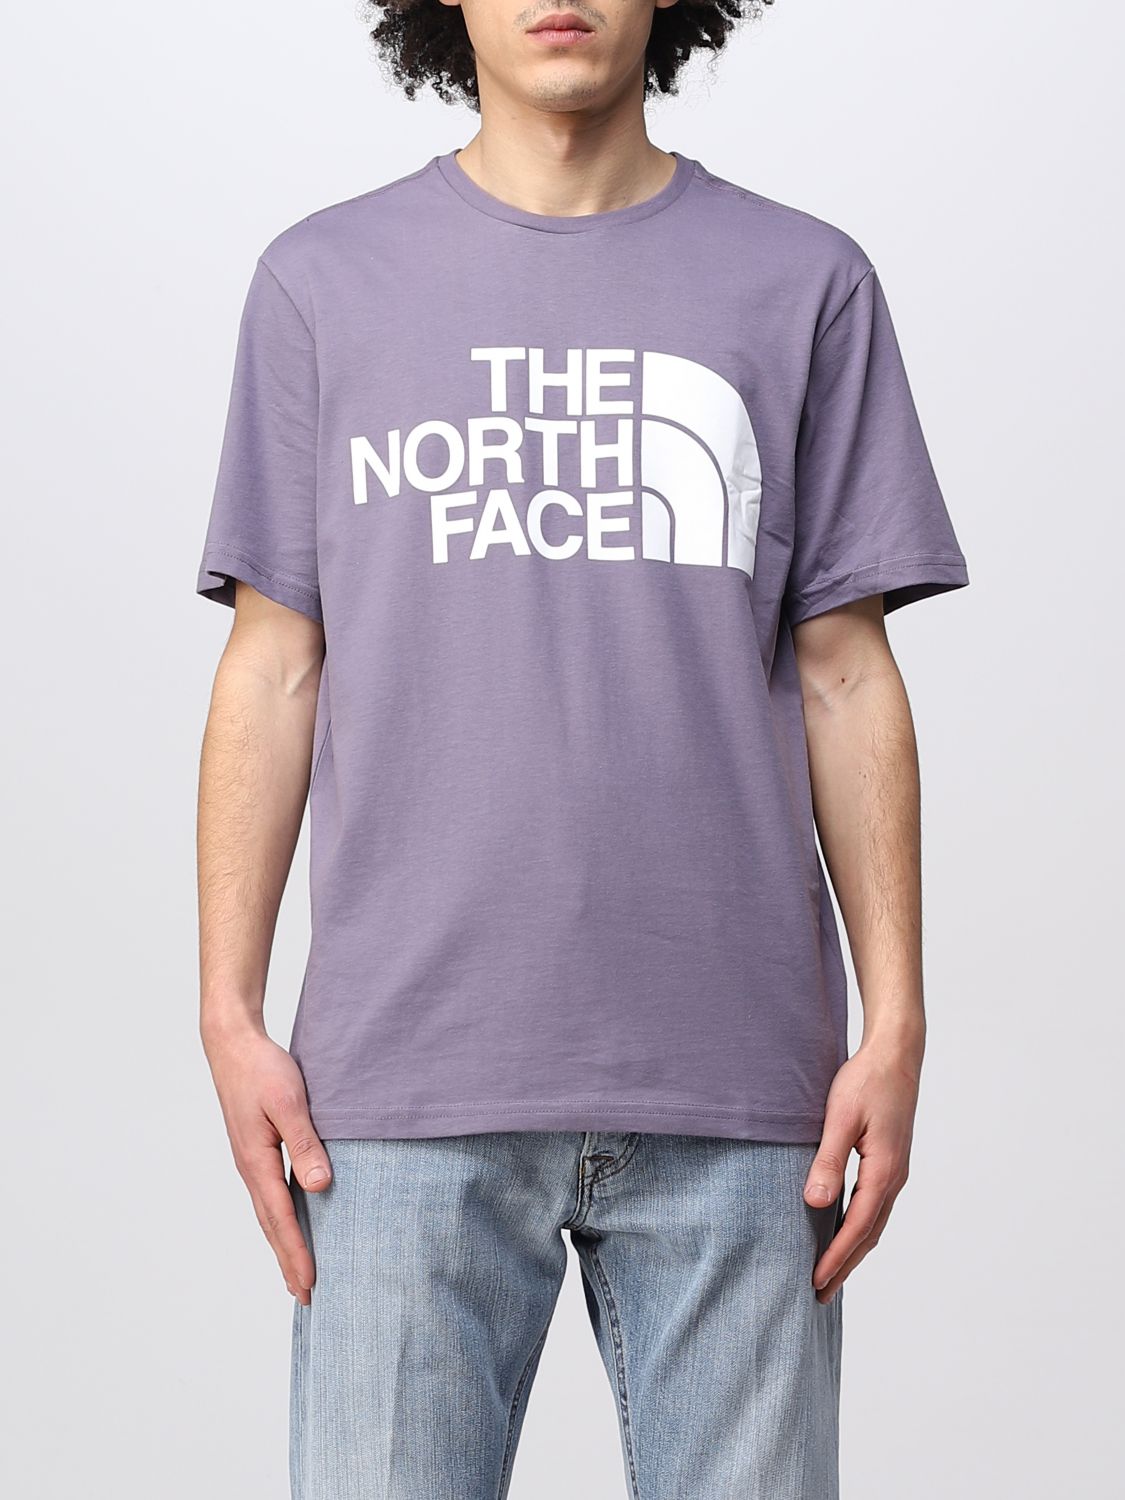 THE NORTH FACE T-SHIRT THE NORTH FACE MEN COLOR VIOLET,381507019